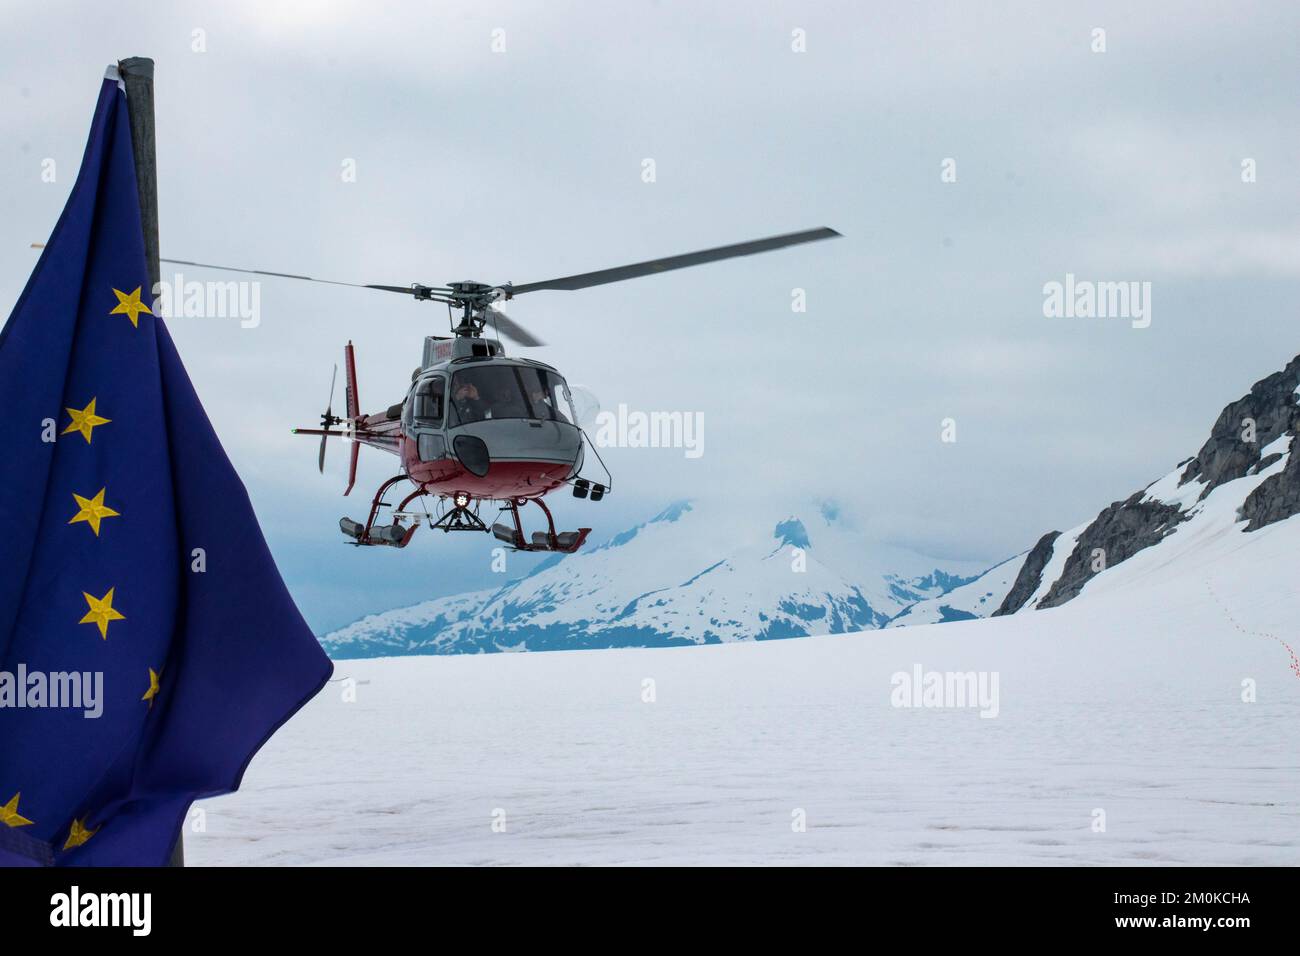 A Helicopter Landing on the Mendenhall Glacier in Alaska with the EU flag Stock Photo